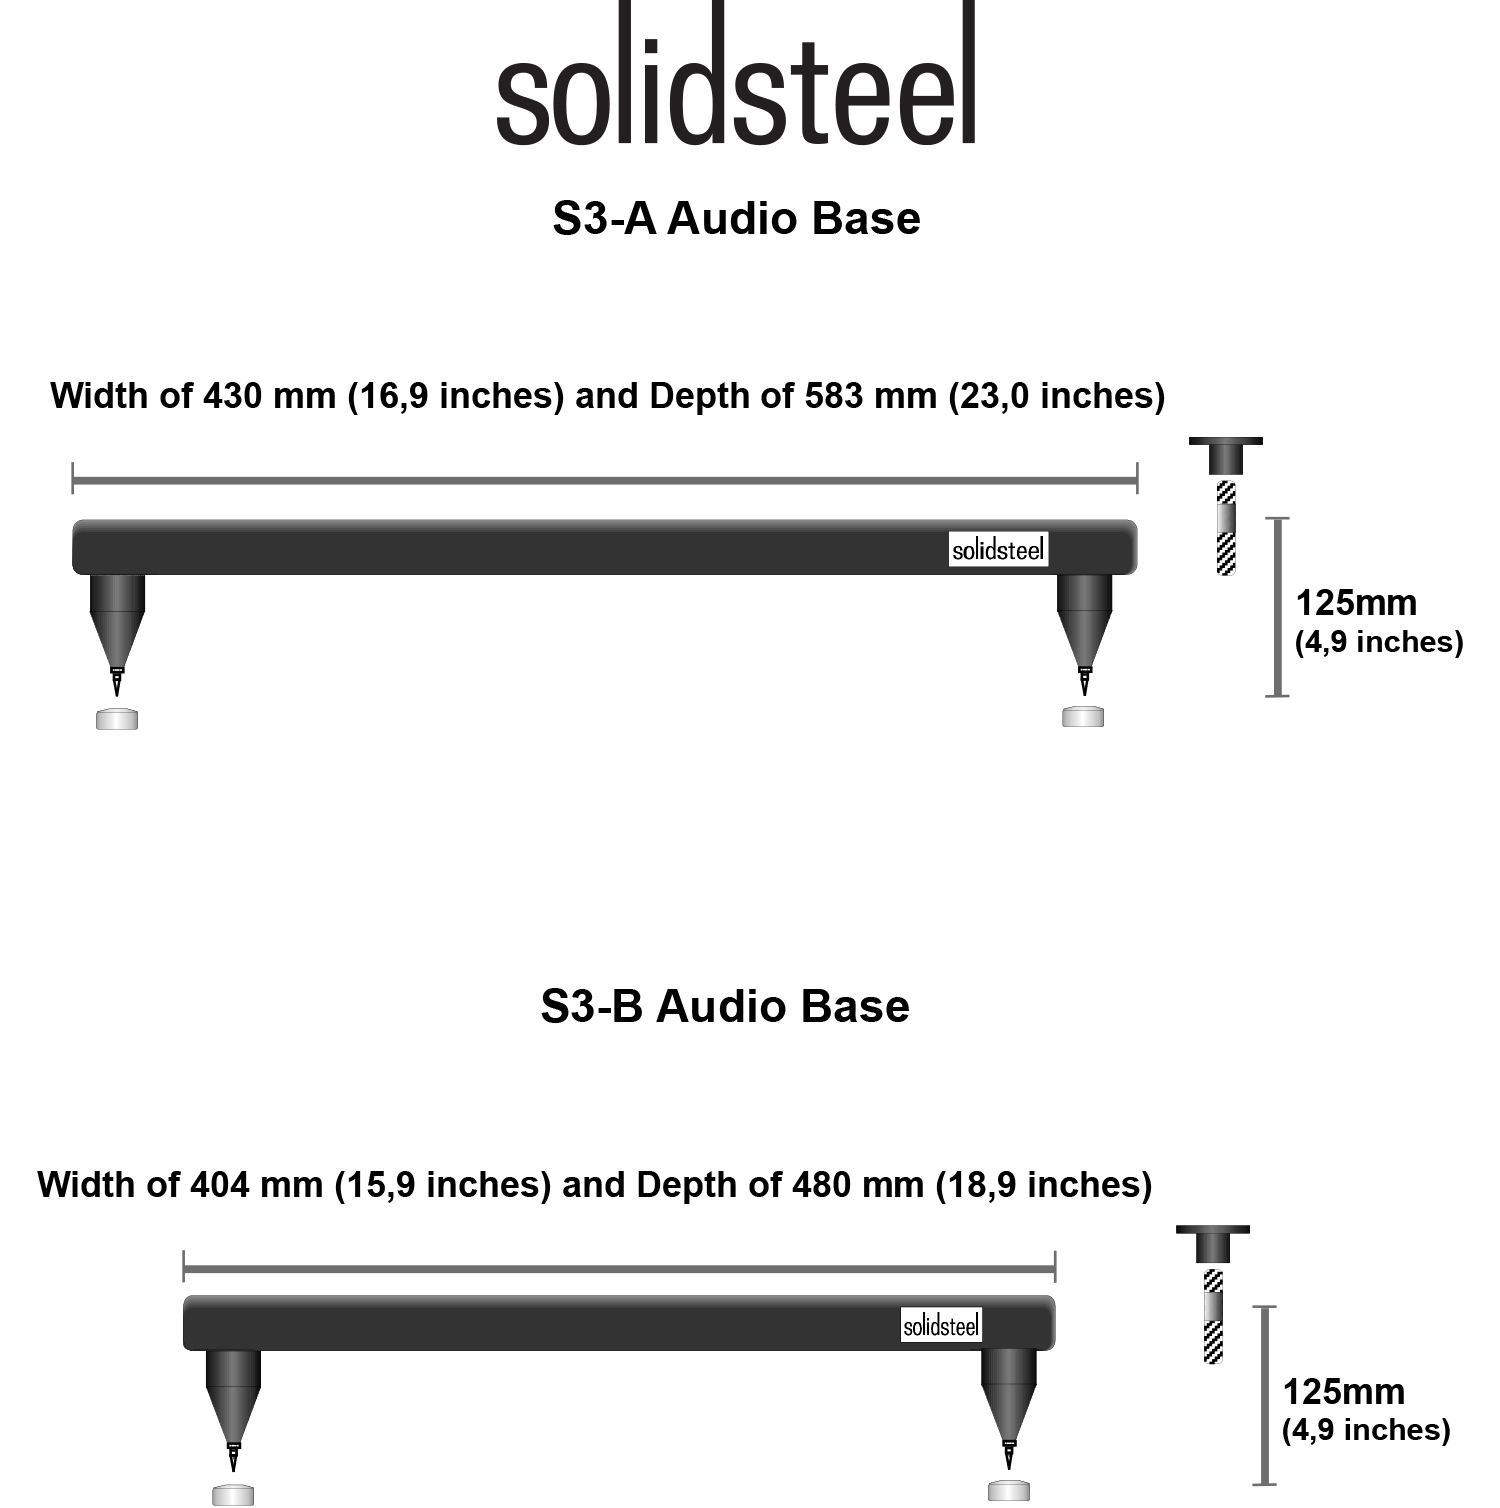 Solidsteel S3-A white